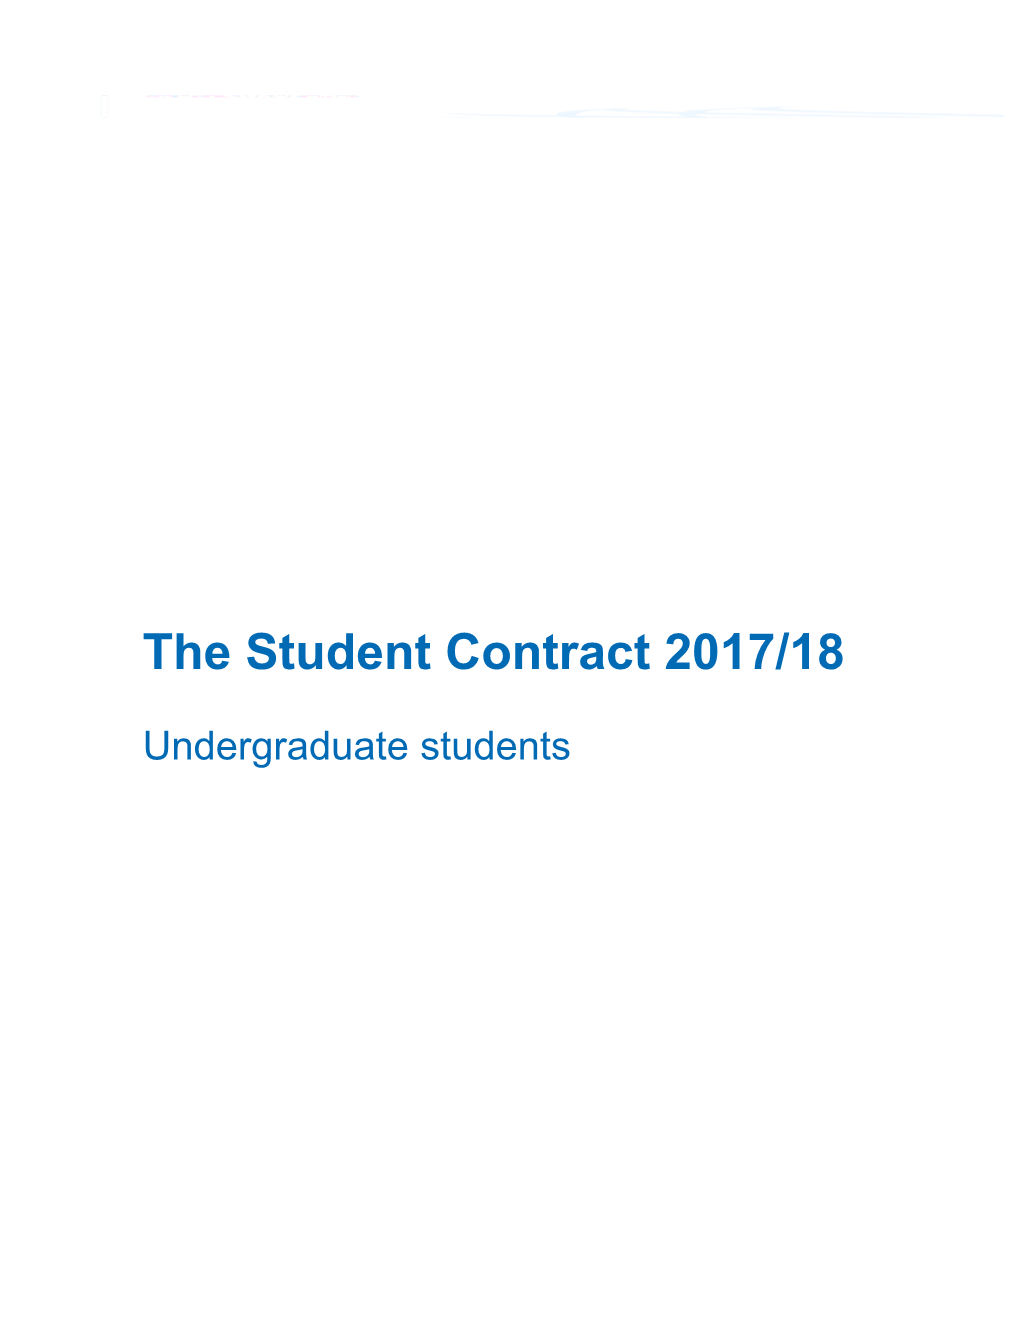 The Student Contract 2017/18